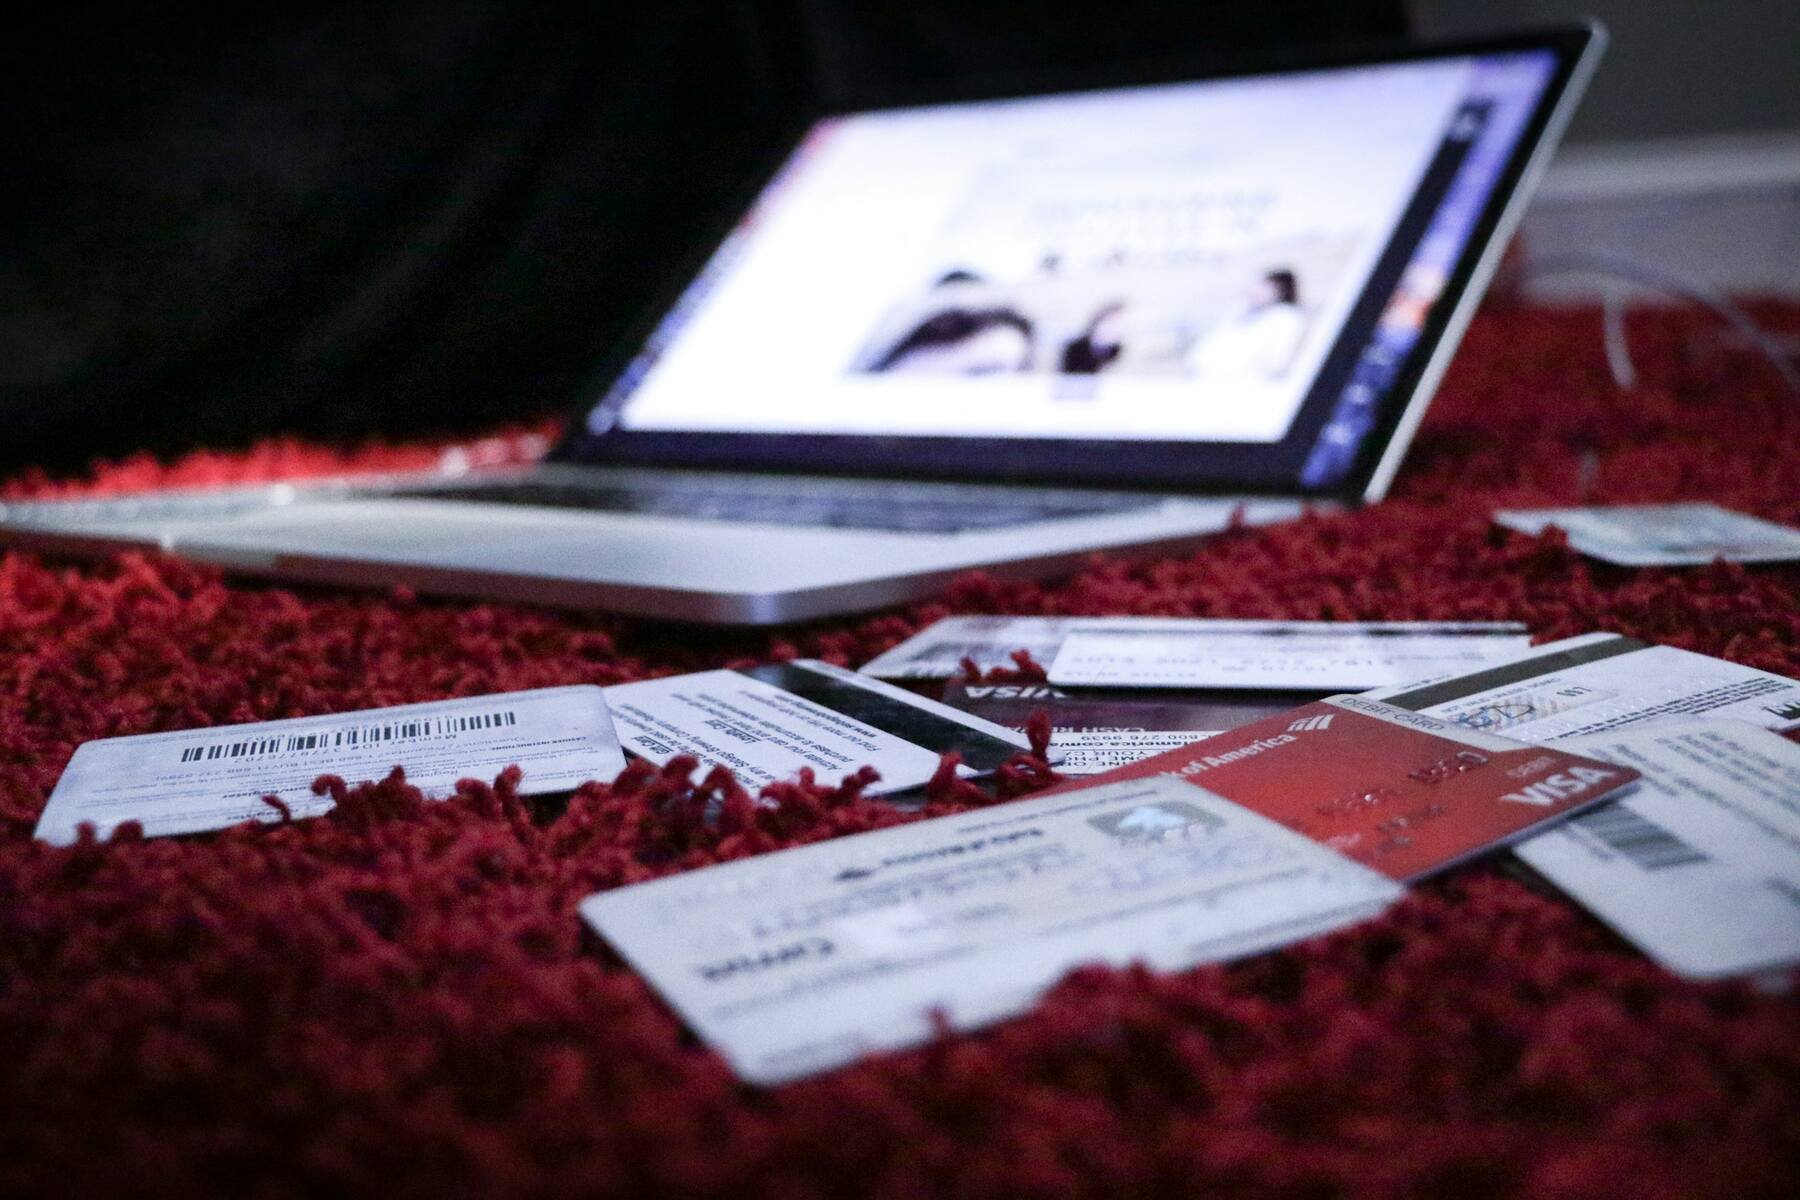 Credit cards scattered on a red carpet with an open laptop in the background